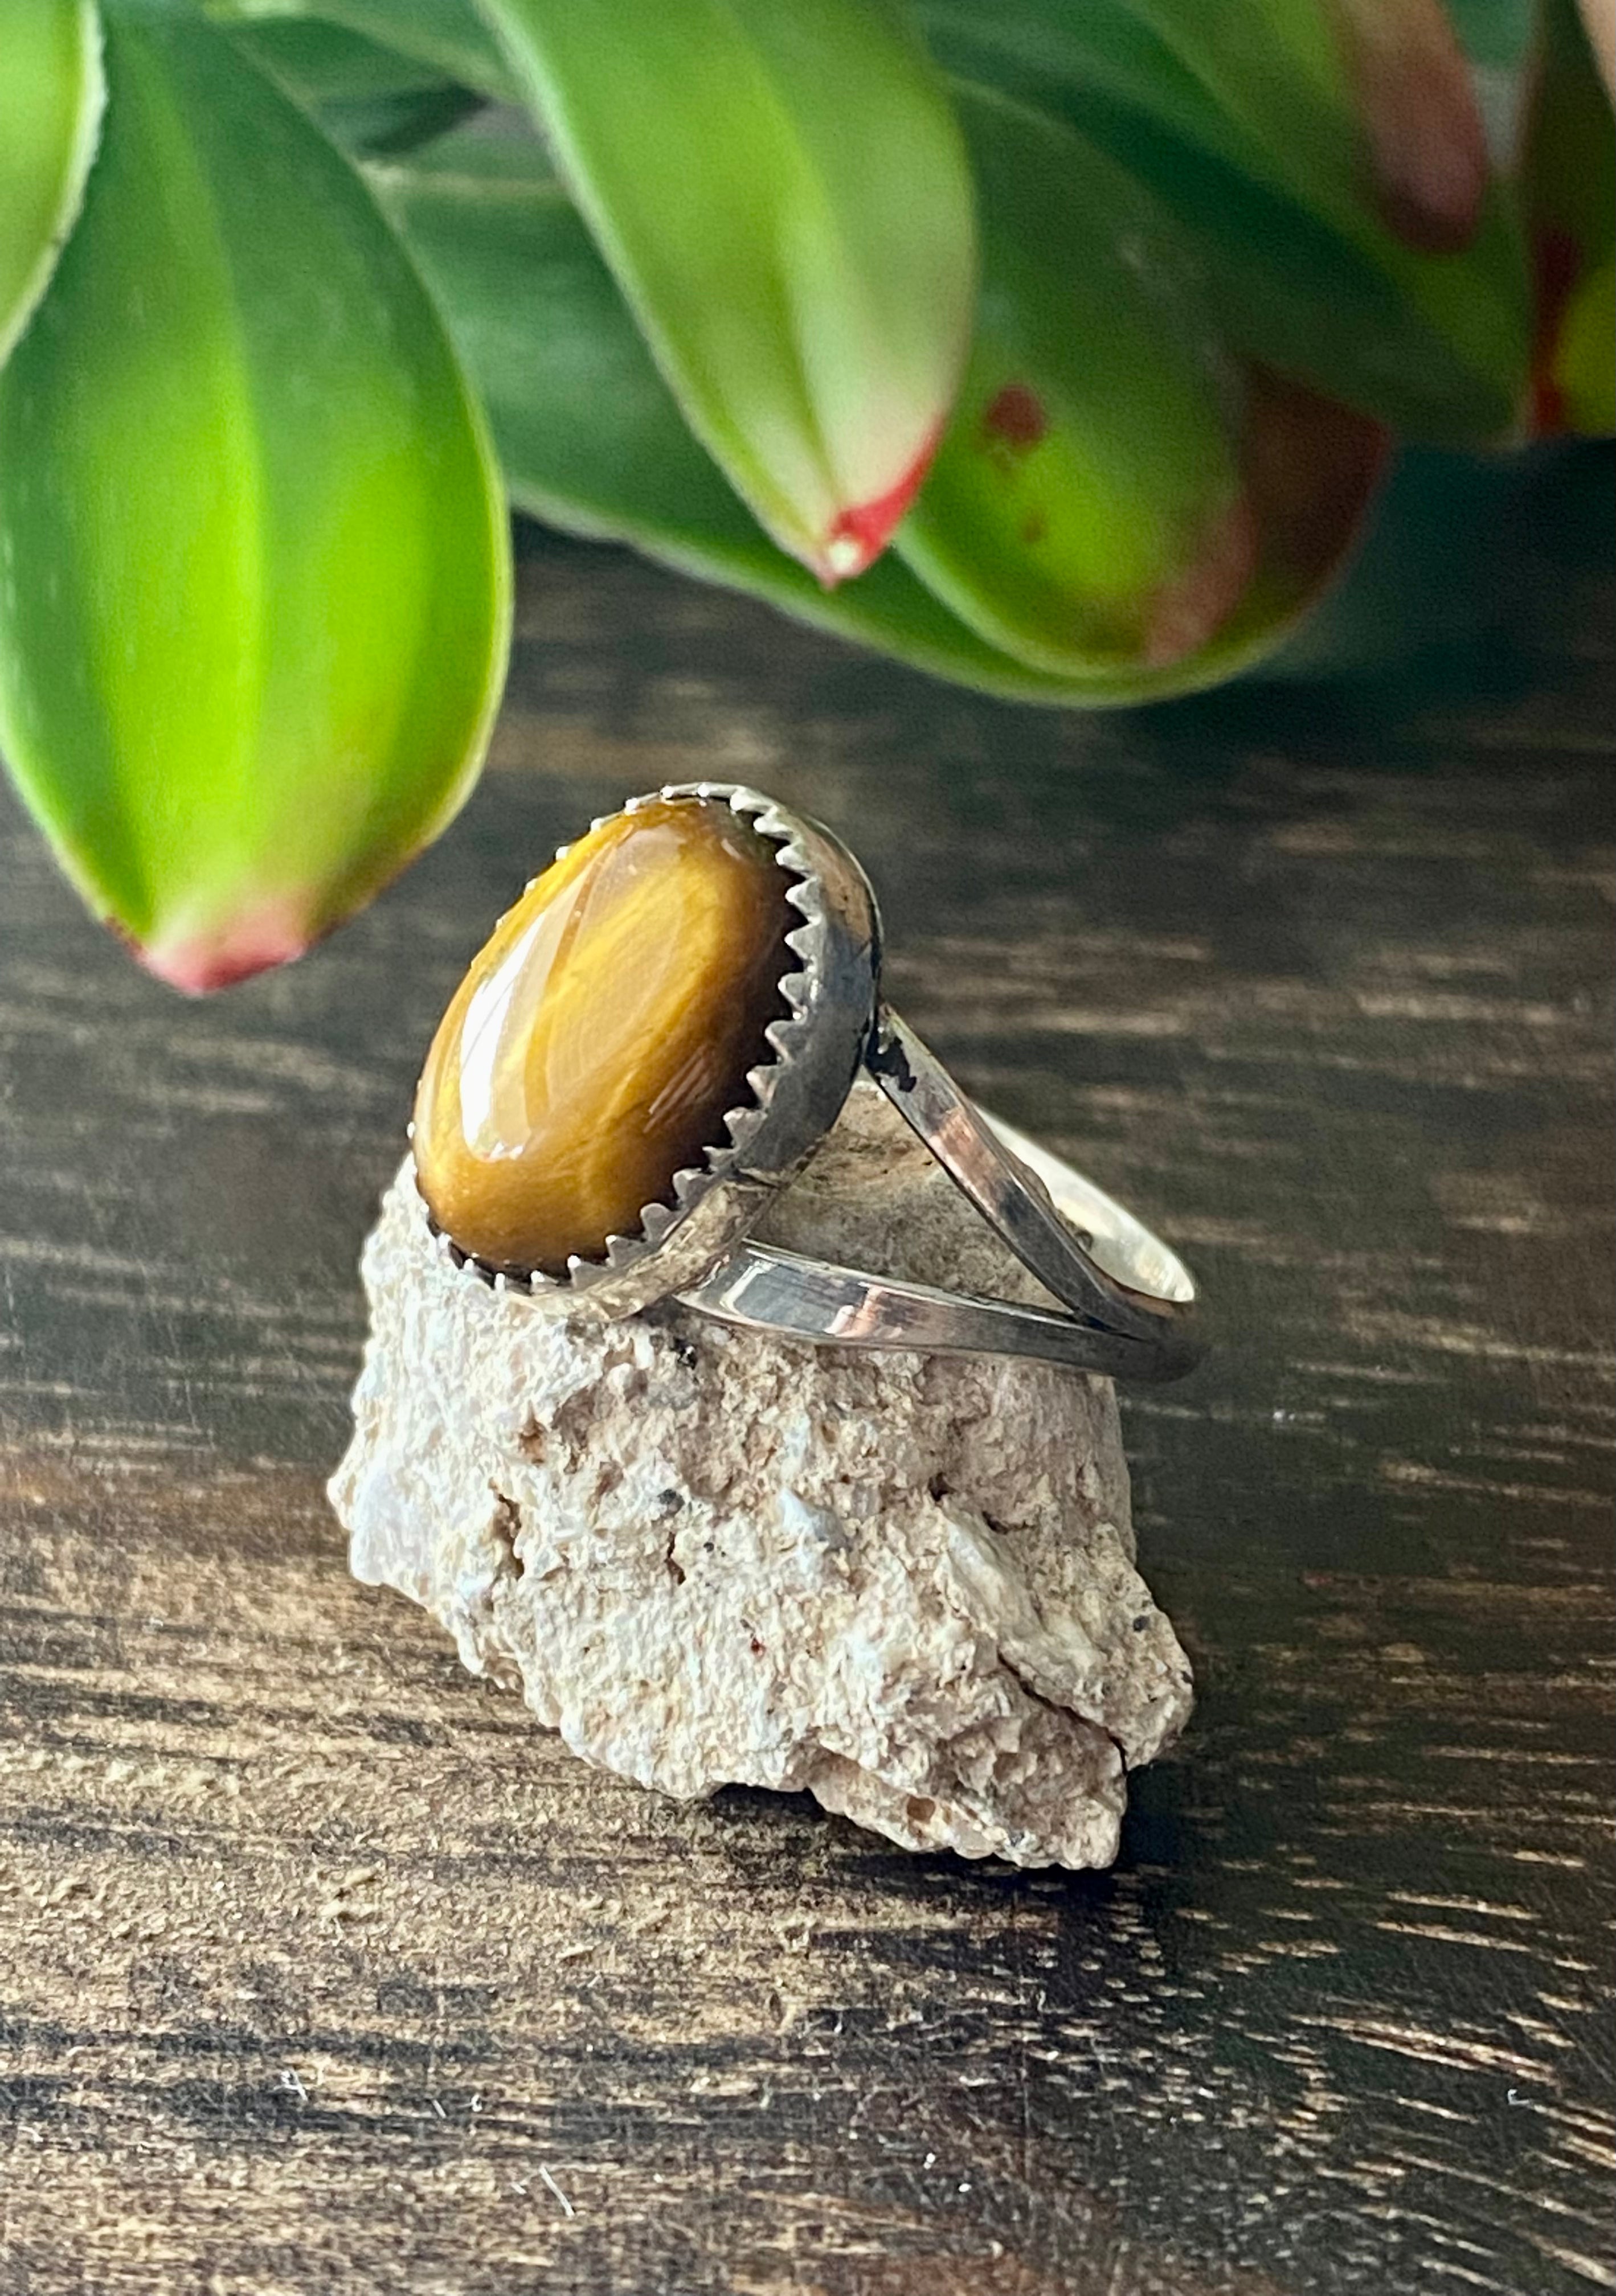 Emerson Martinez Tigers Eye & Sterling Silver Ring Size 9.75